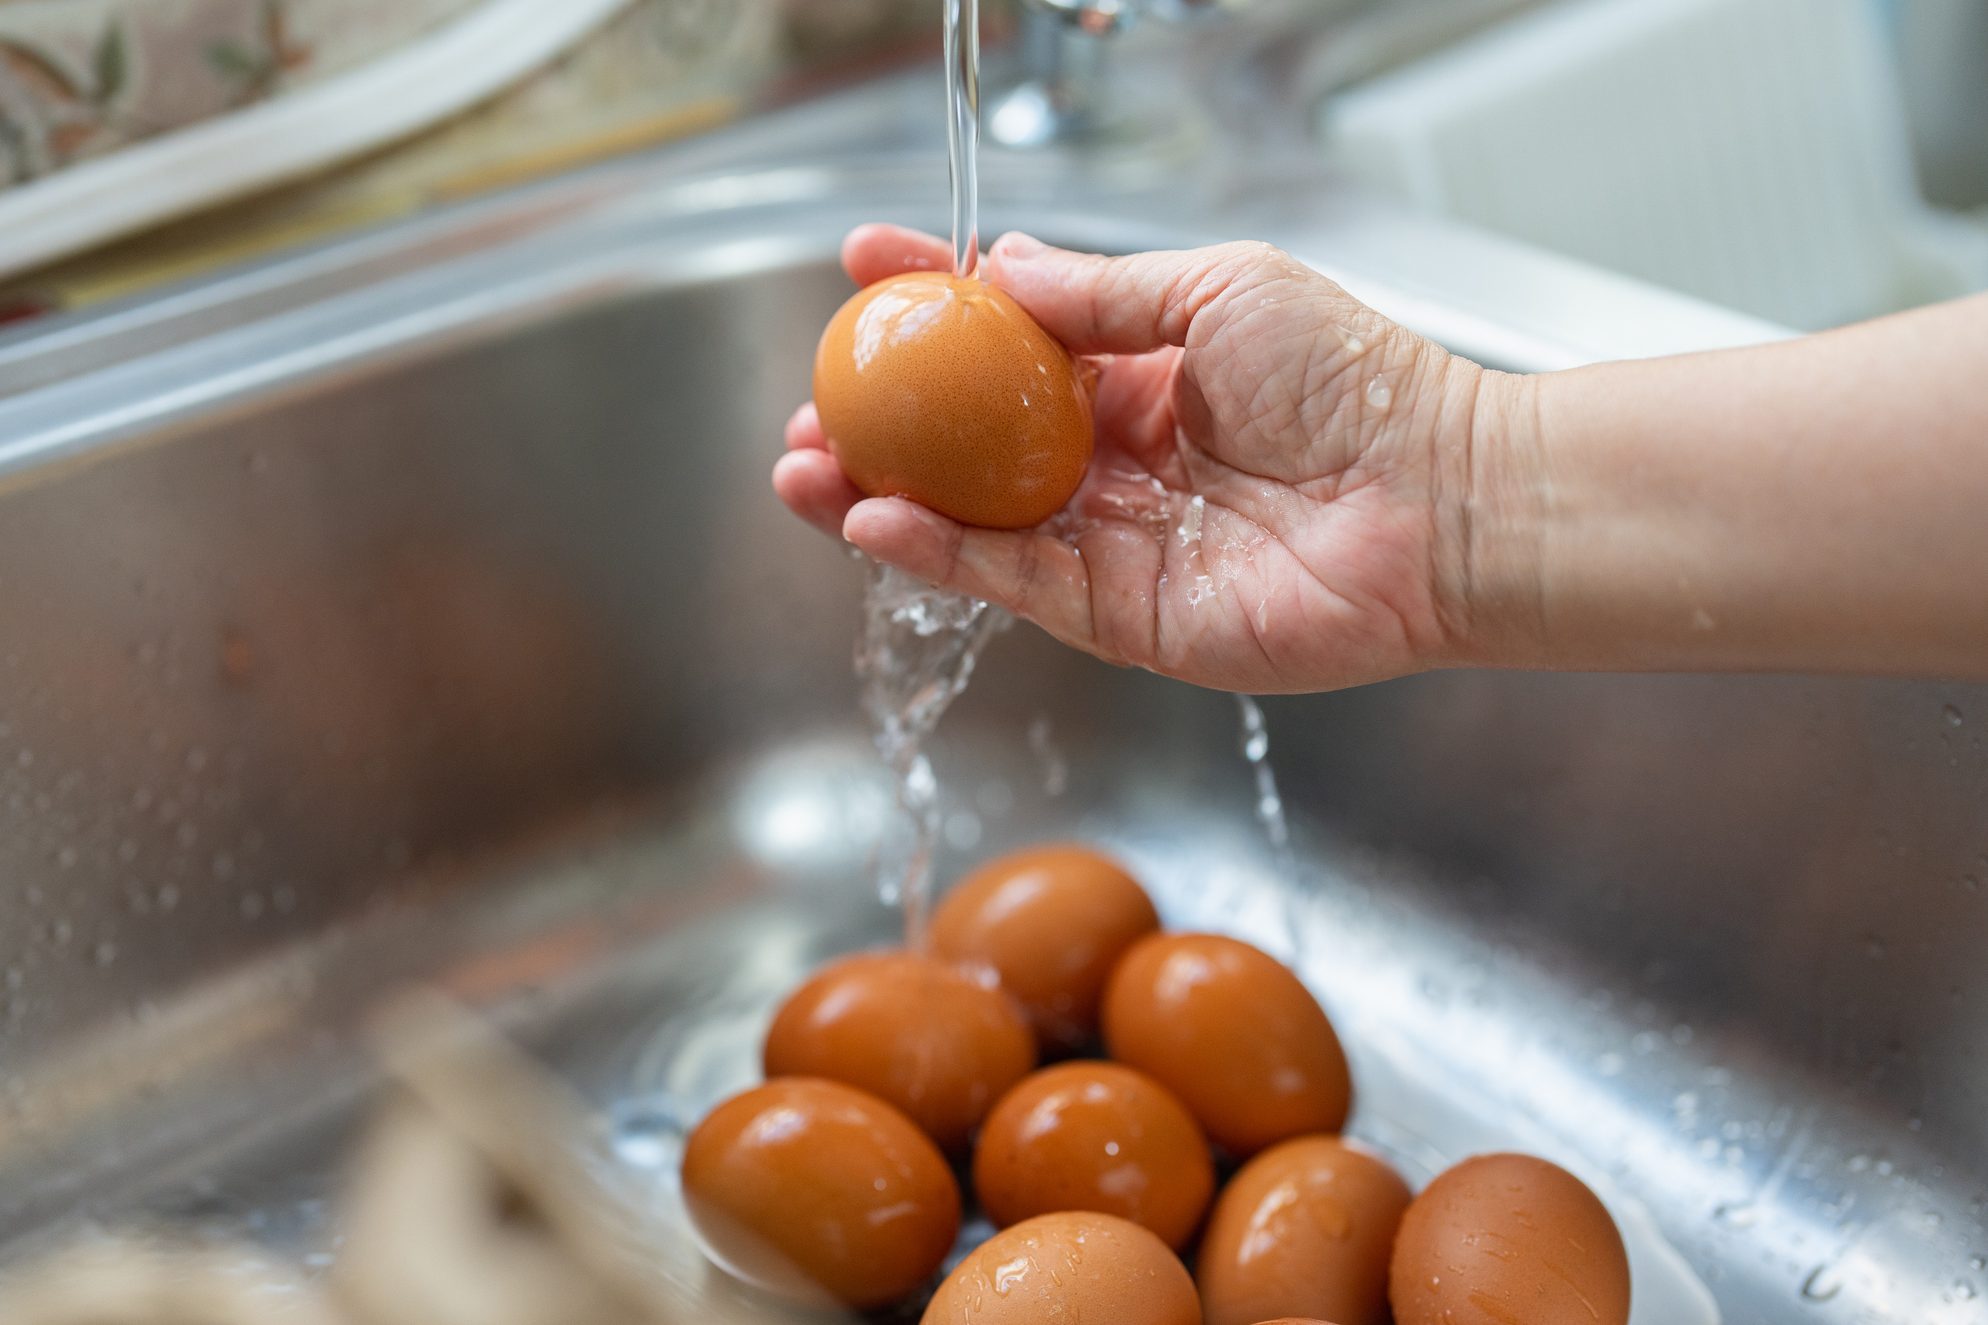 Egg washer, Taking cleaning to a higher level